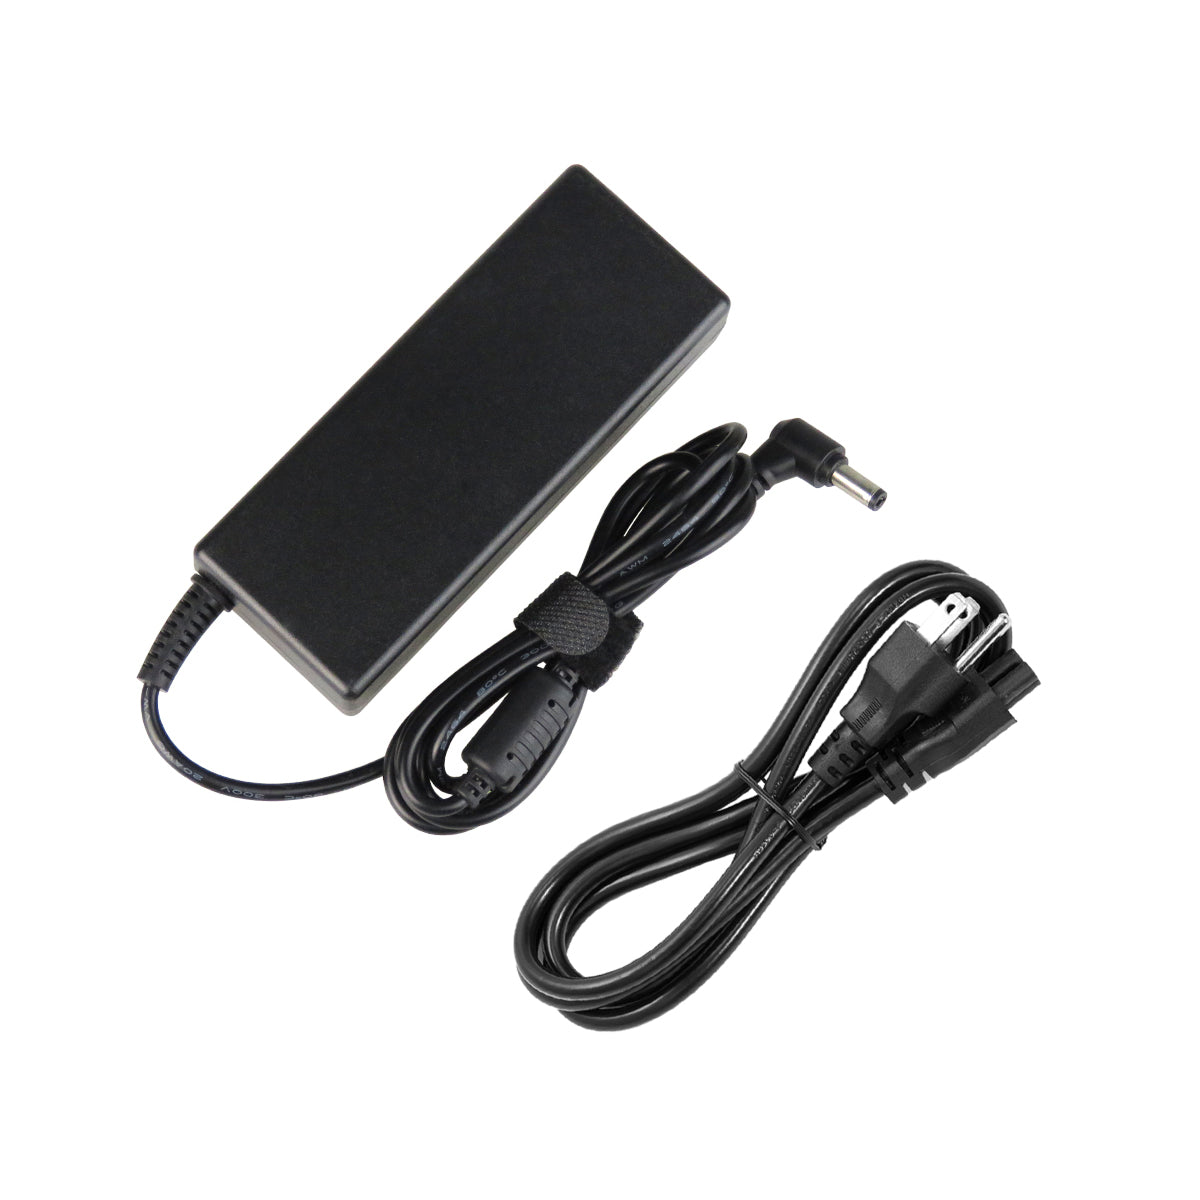 AC Adapter Charger for ASUS X75A-DS51 Notebook.